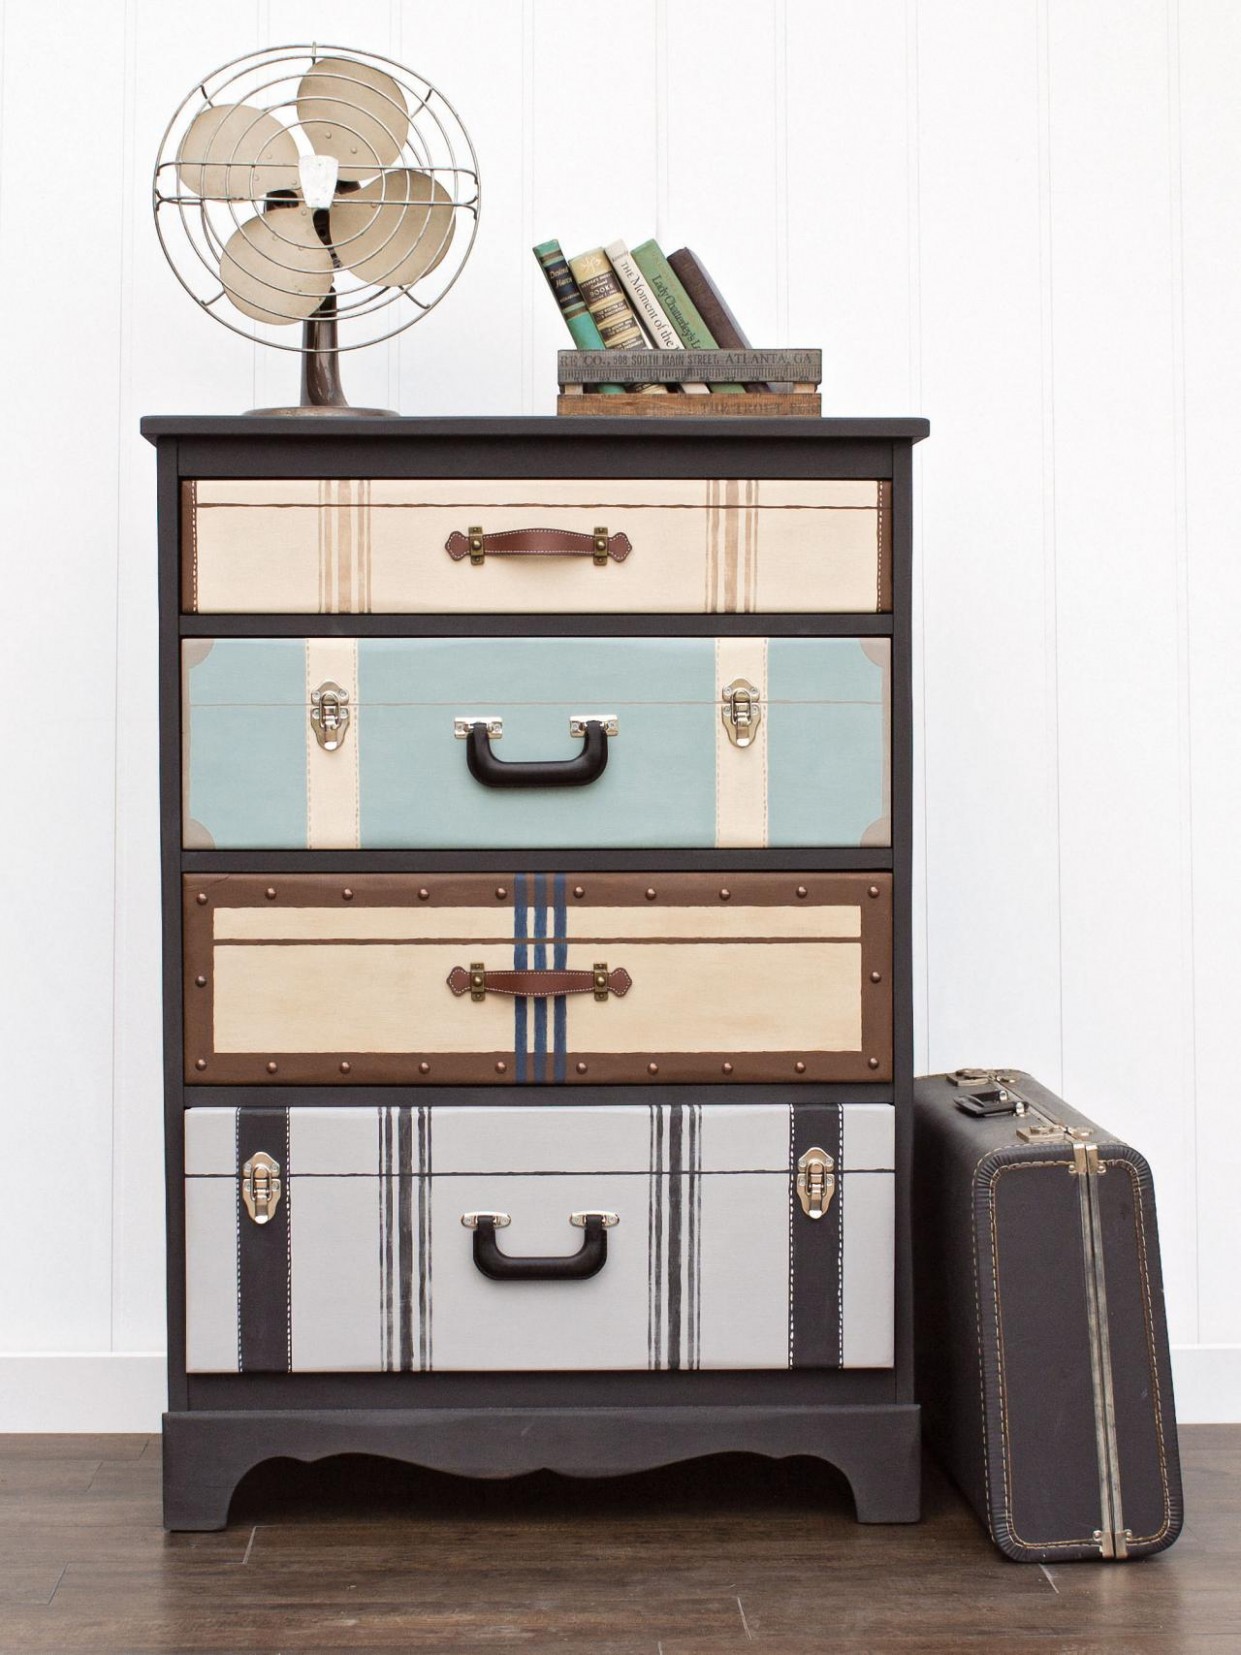 How To Paint A Dresser So It Looks Like A Stack Of Suitcases | Hgtv Where To Buy Annie Sloan Chalk Paint In Austin Tx